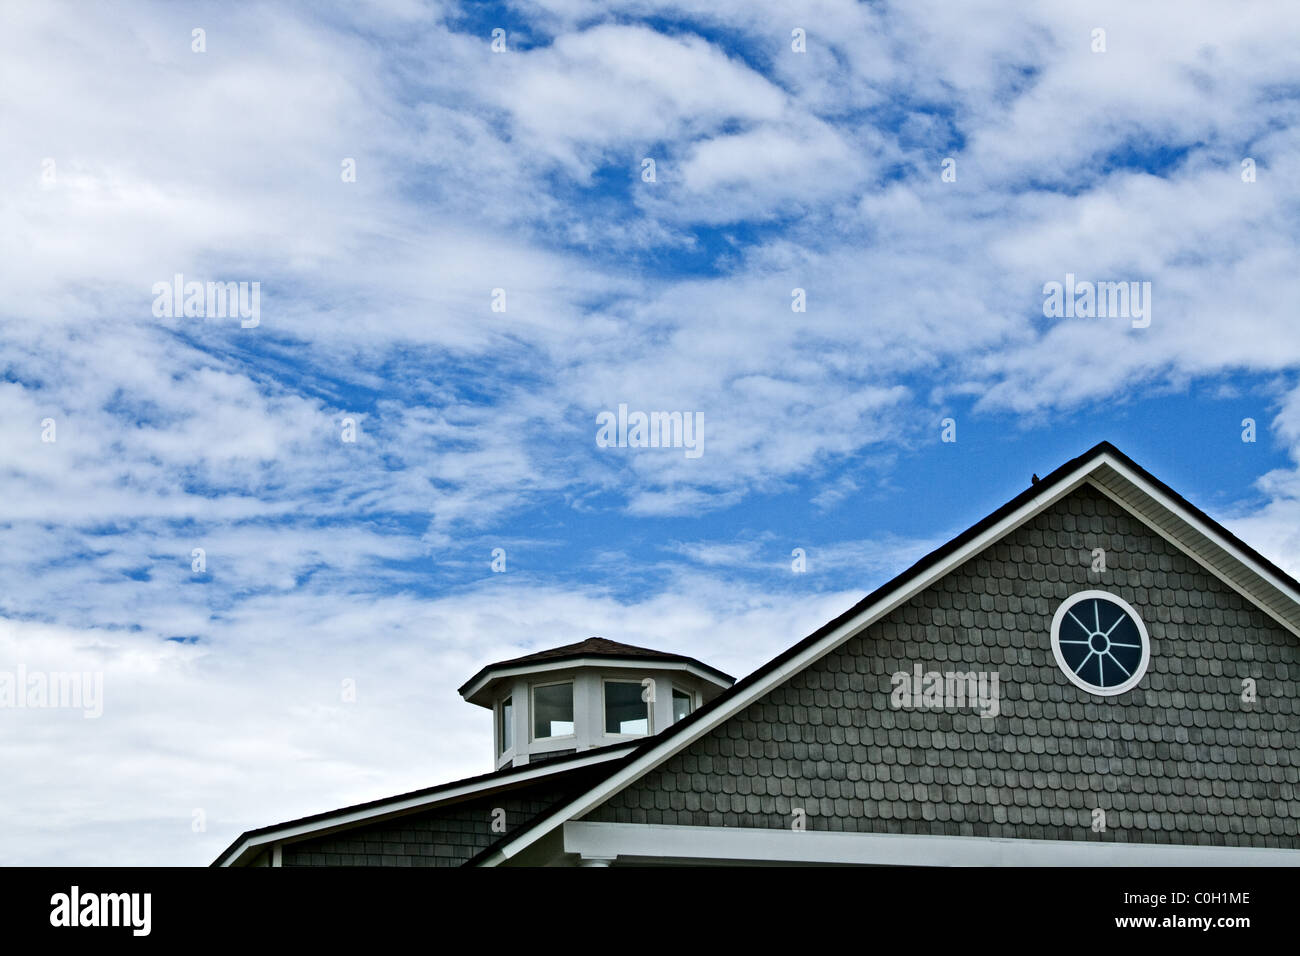 Gable of a grey house showing against a blue sky with puffy clouds Stock Photo